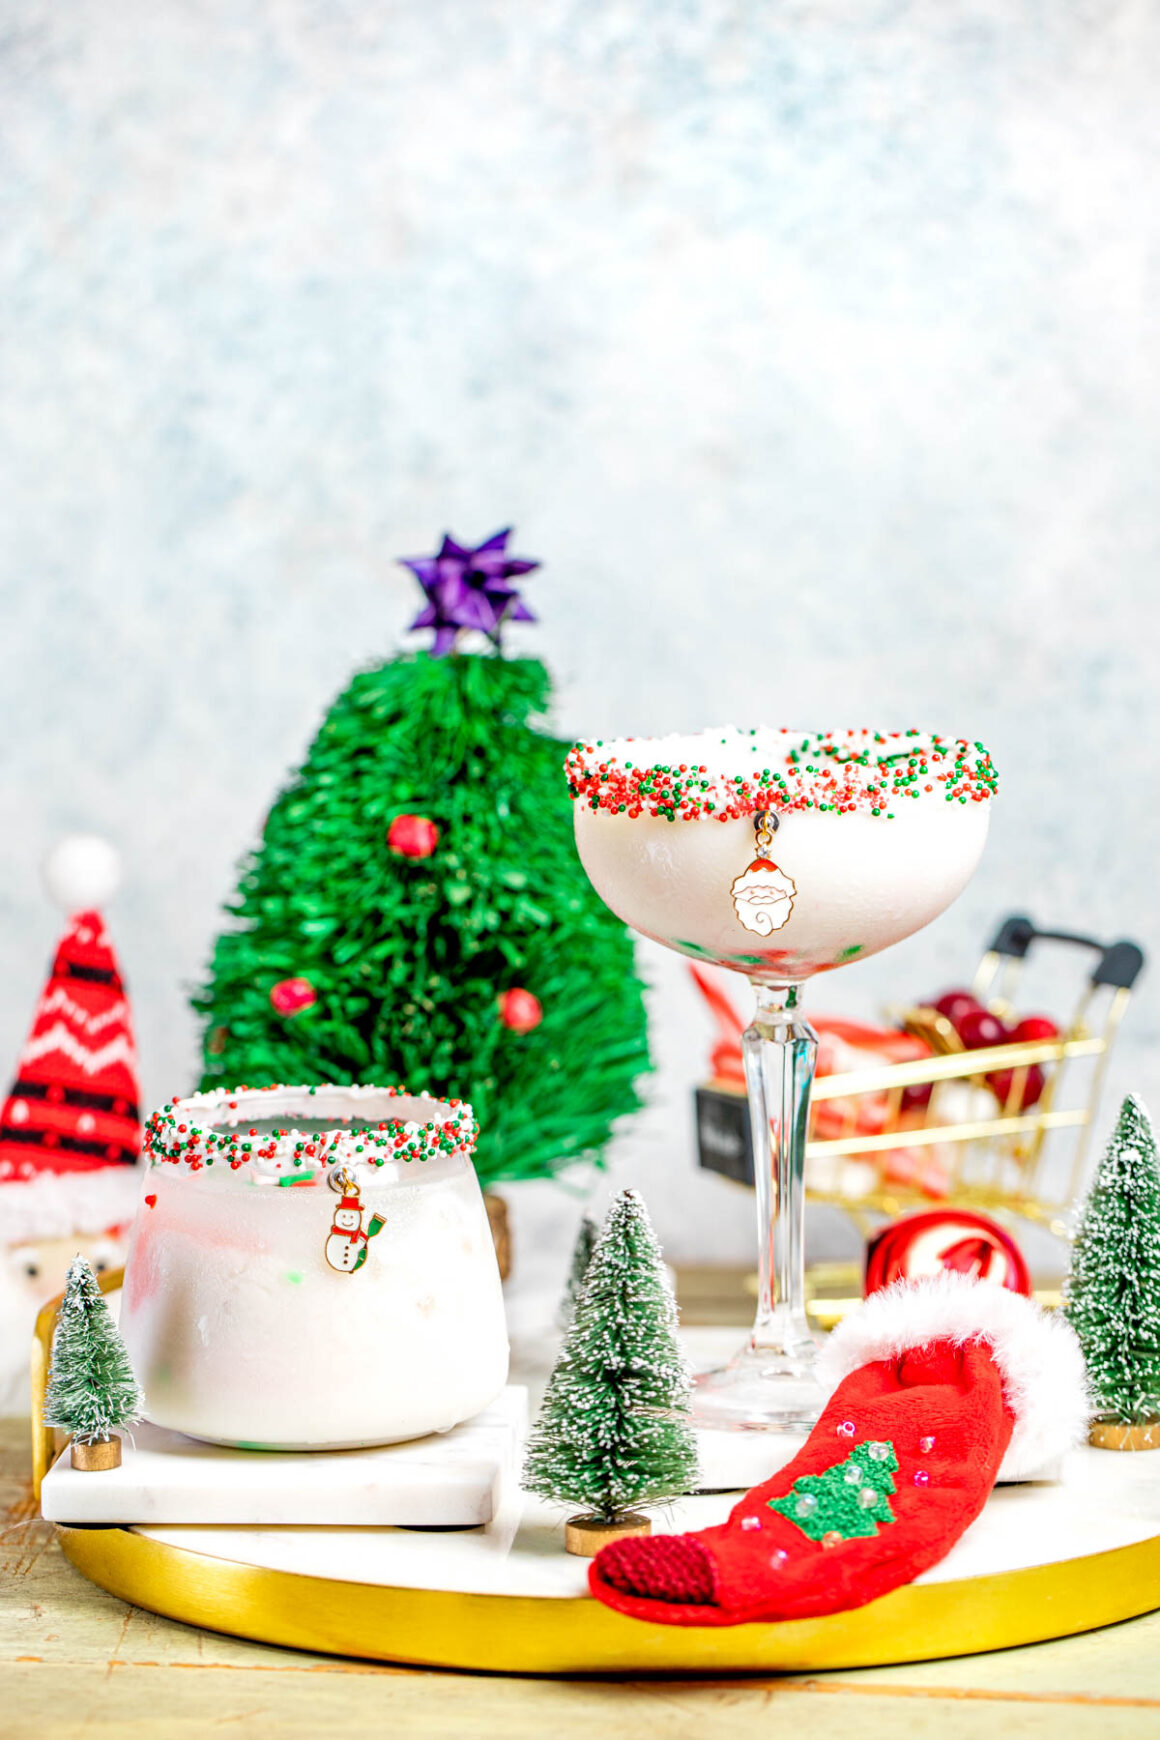 The Sugar Cookie Martini captures the essence of the holiday season and serves as a delicious treat during holiday gatherings and celebrations.